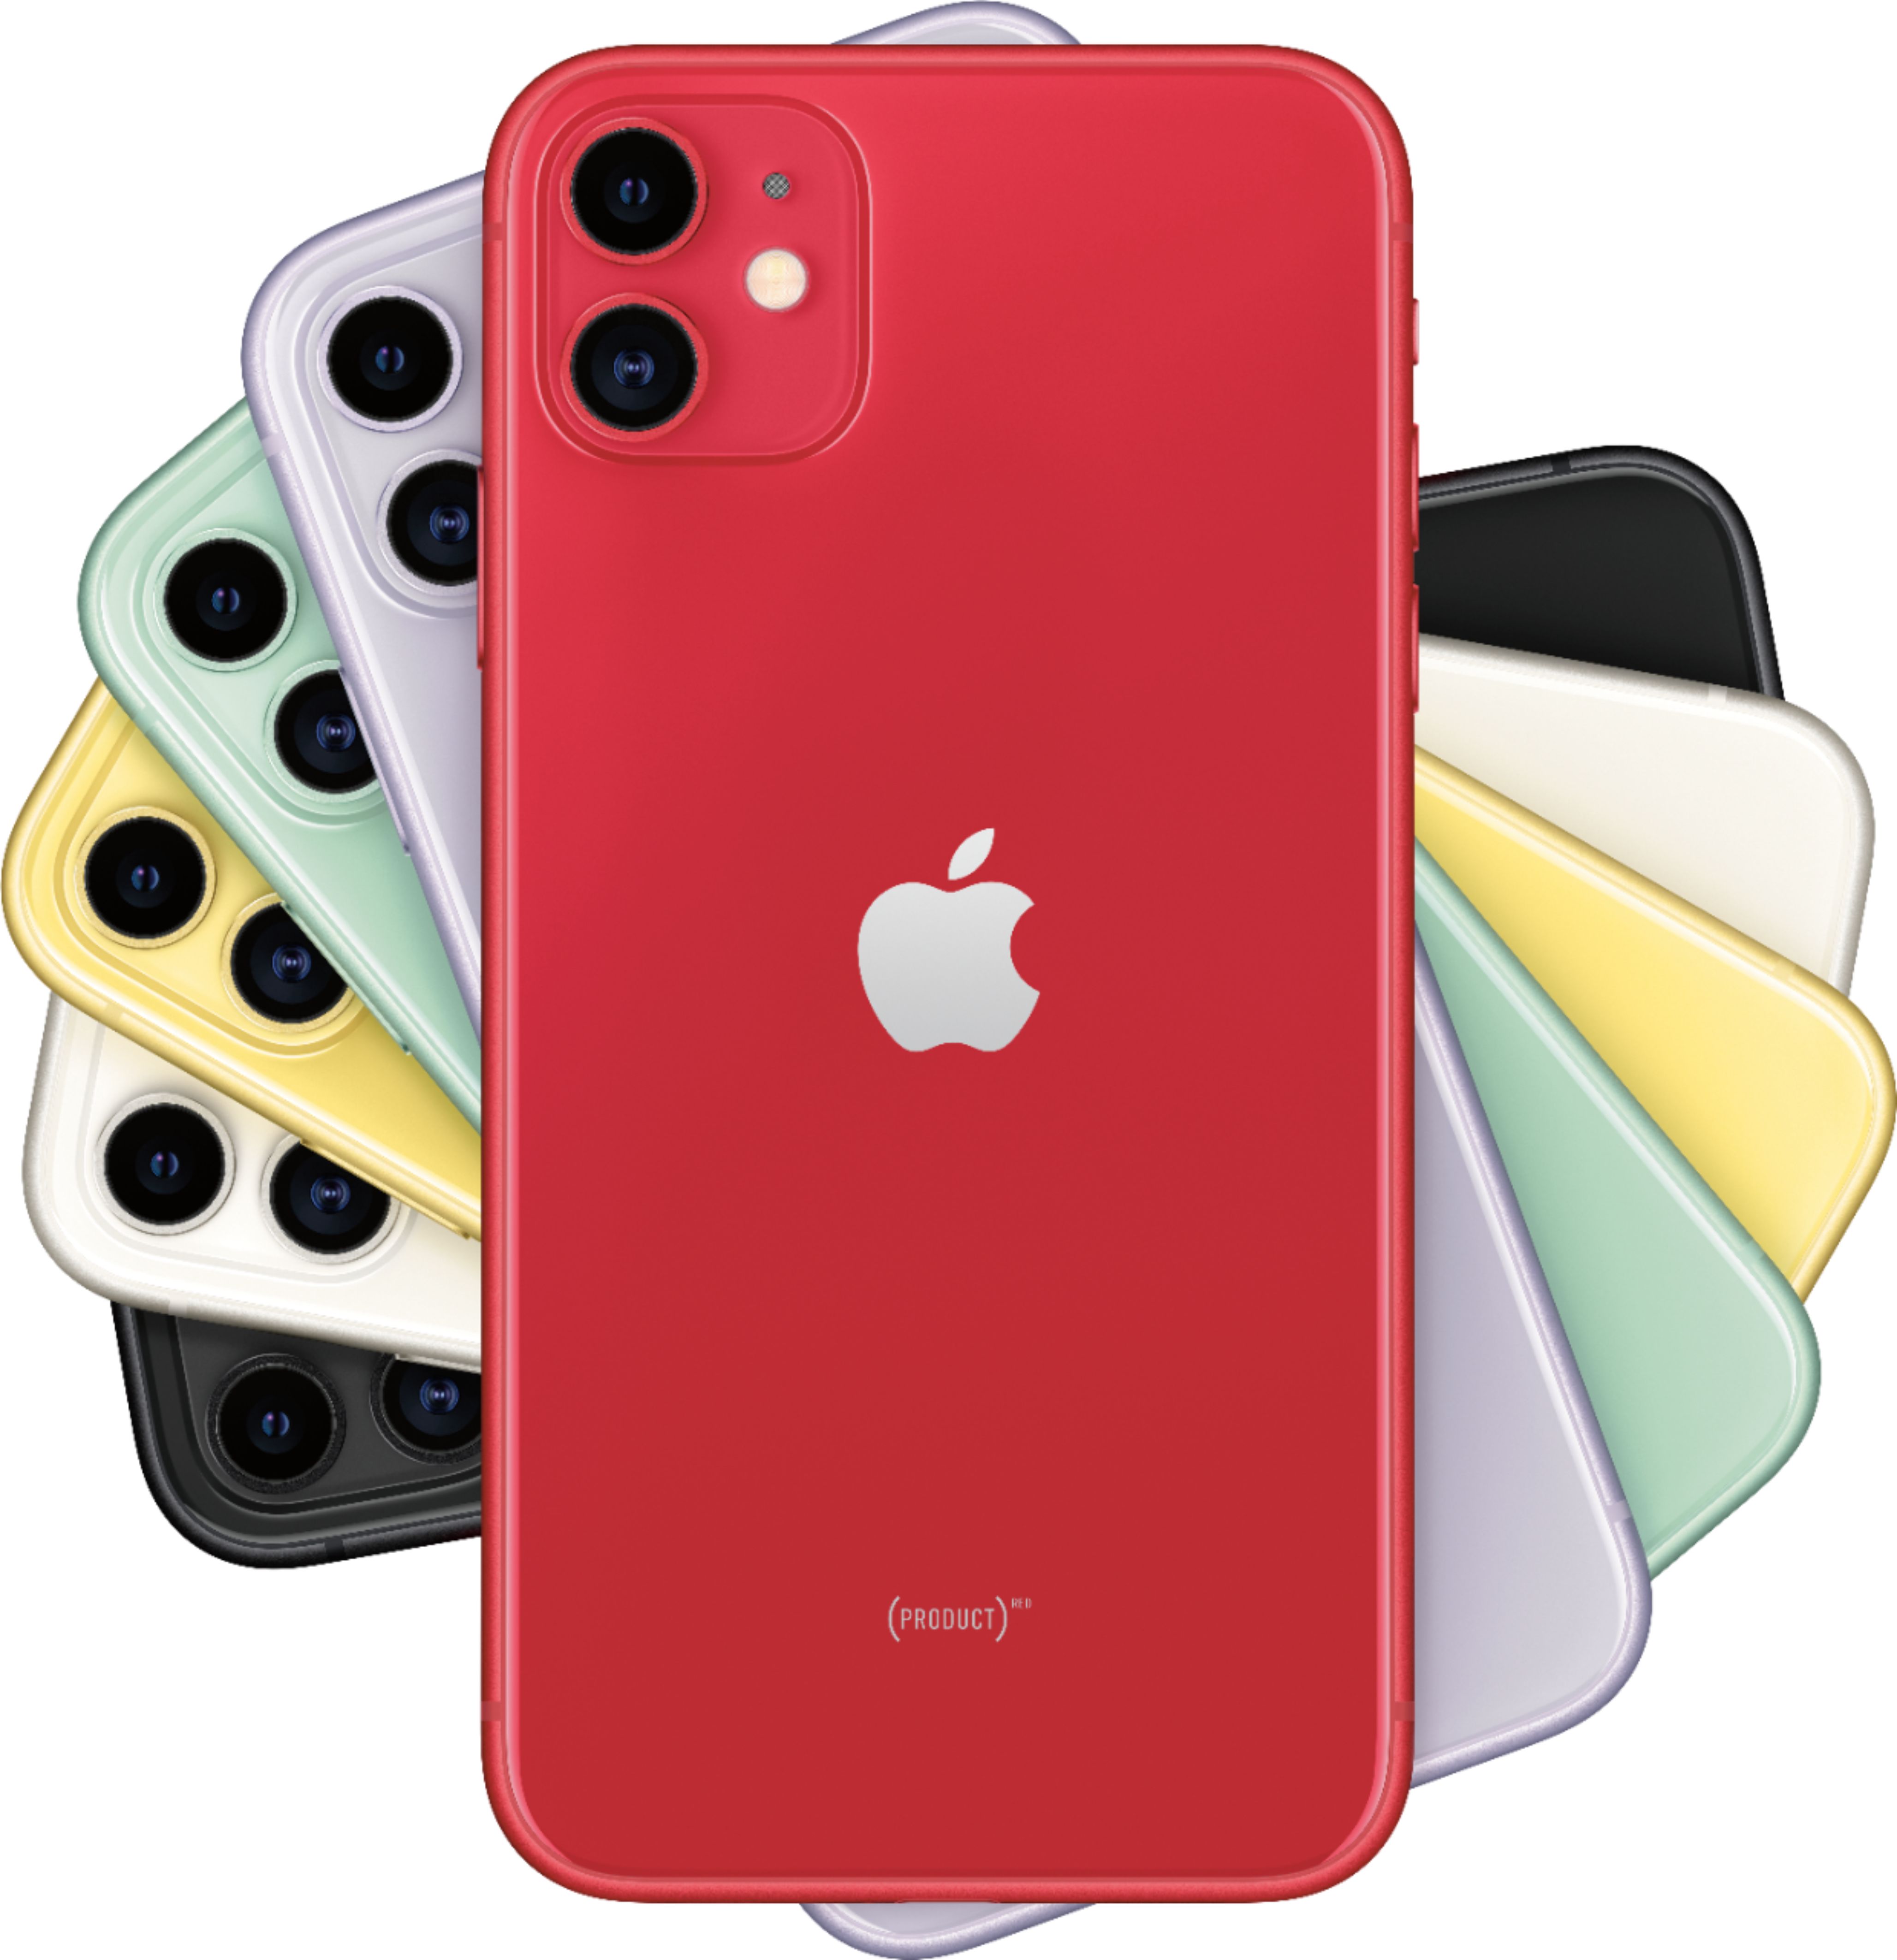 Apple iPhone 11 256GB (PRODUCT)RED (Sprint - Best Buy